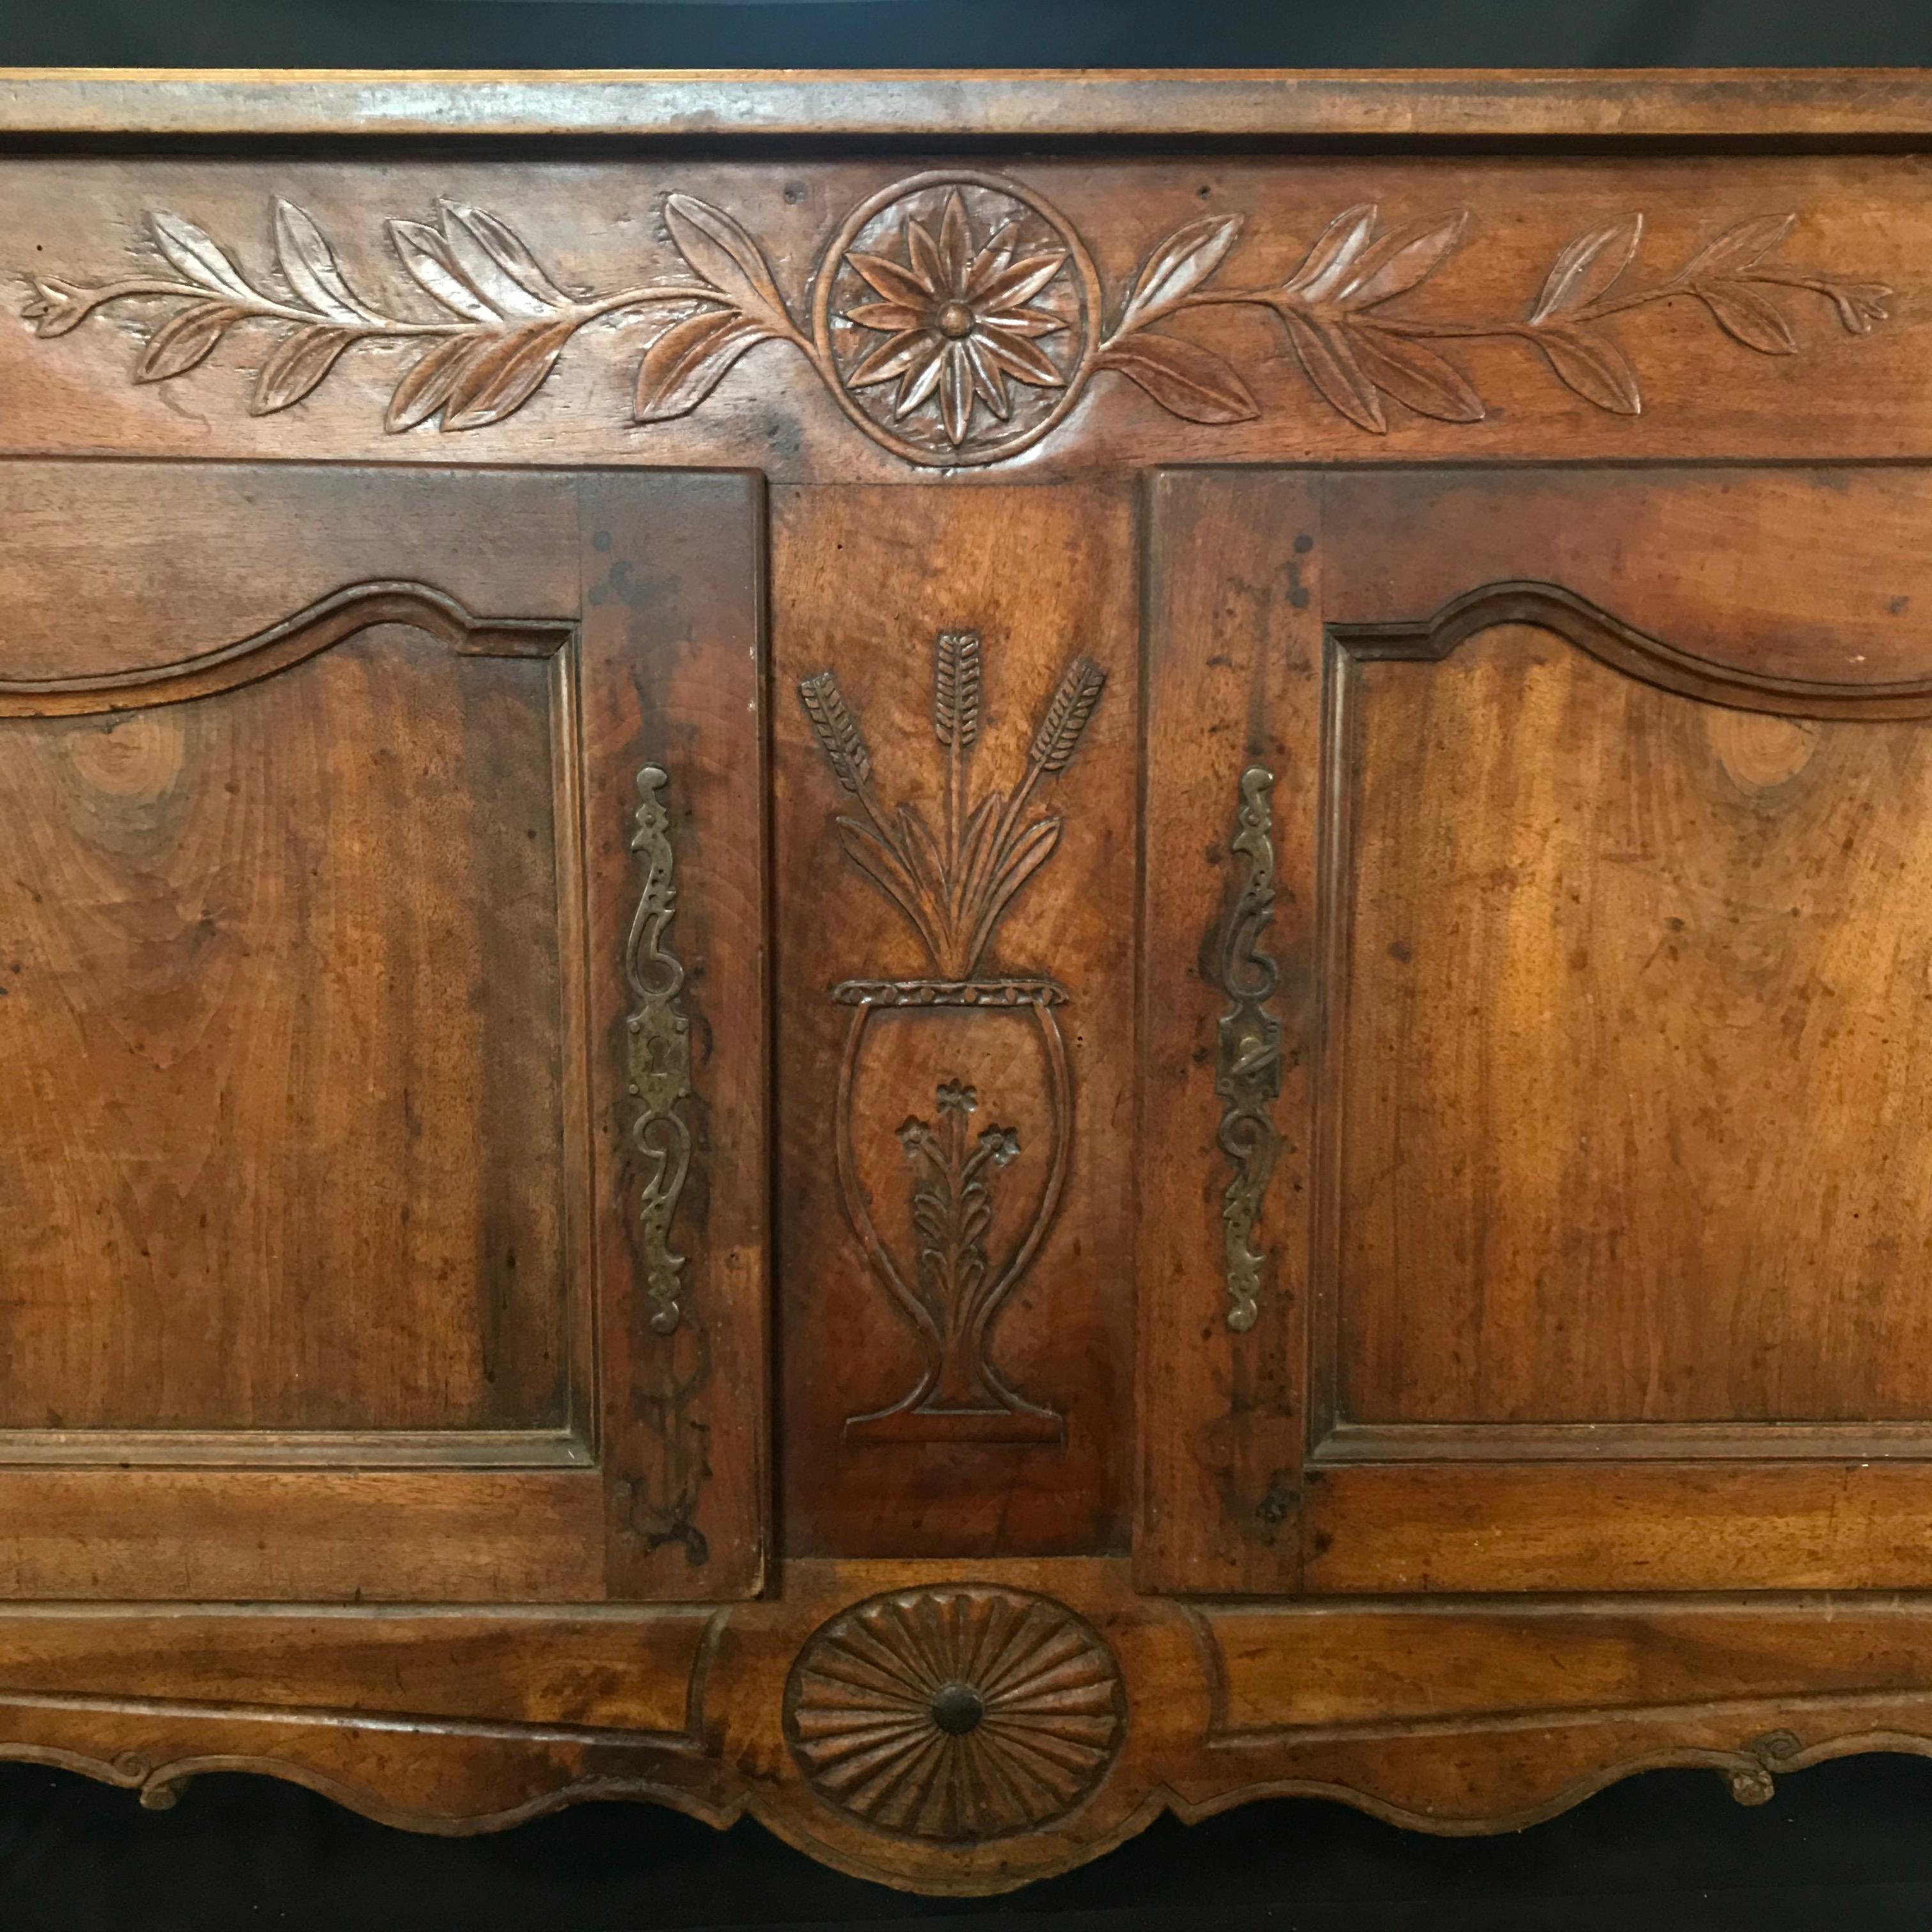 French Provincial early 19th century walnut sideboard cabinet with two doors, interior storage and lovely country style carvings.
 
#5071.
 